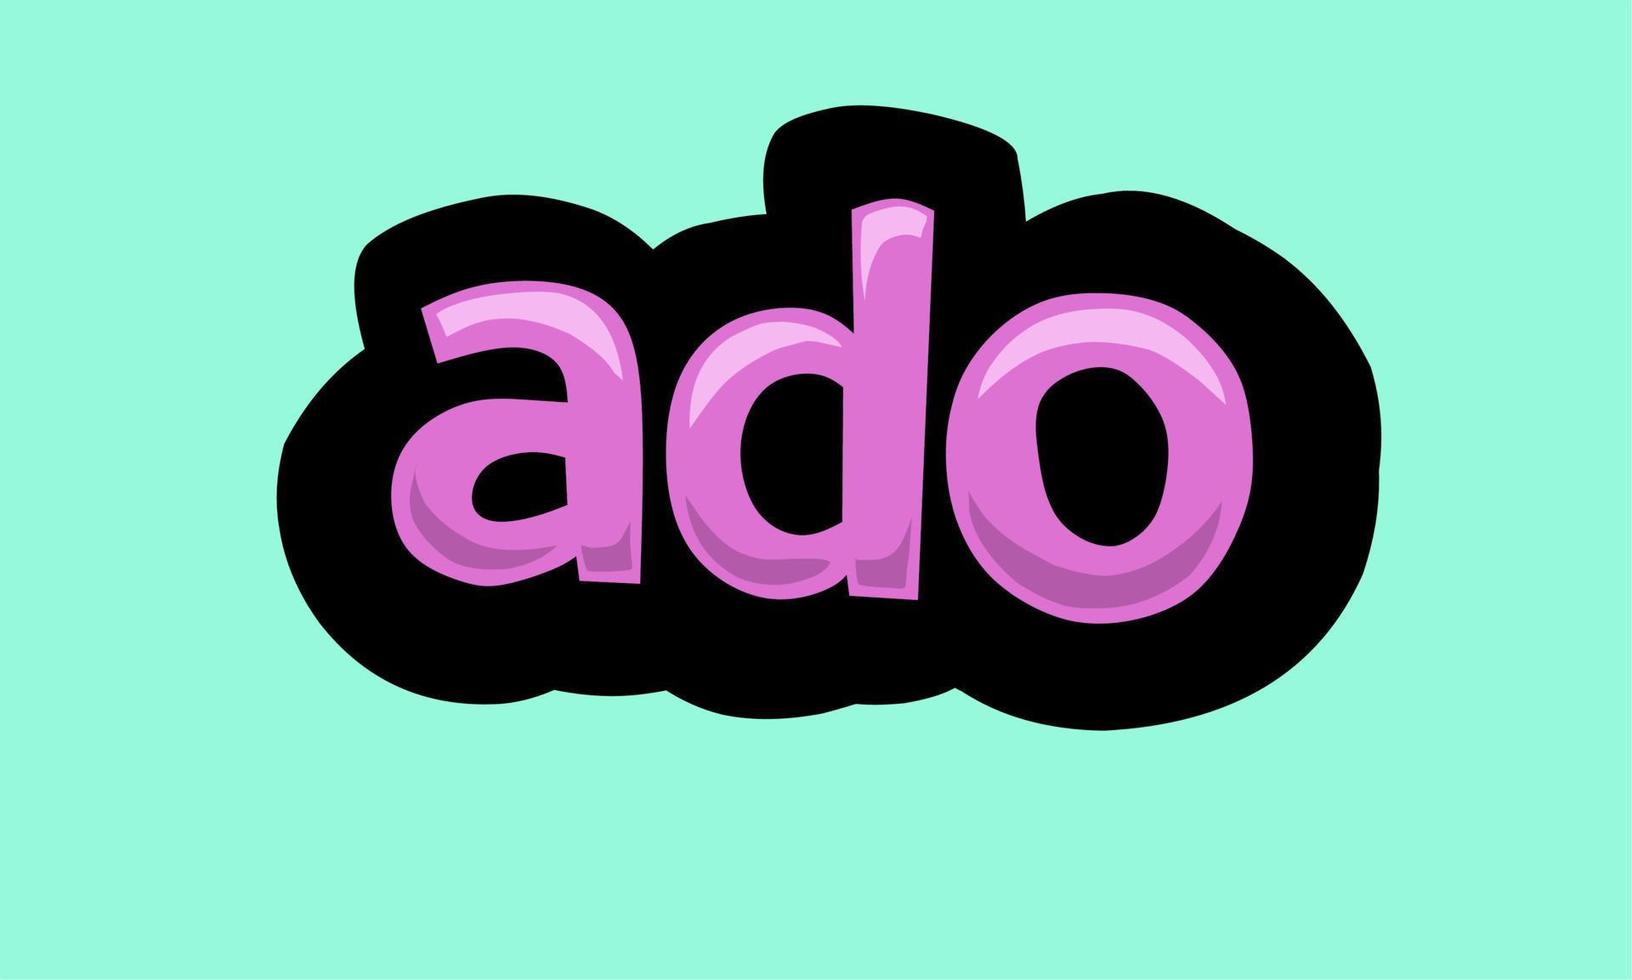 ADO writing vector design on a blue background